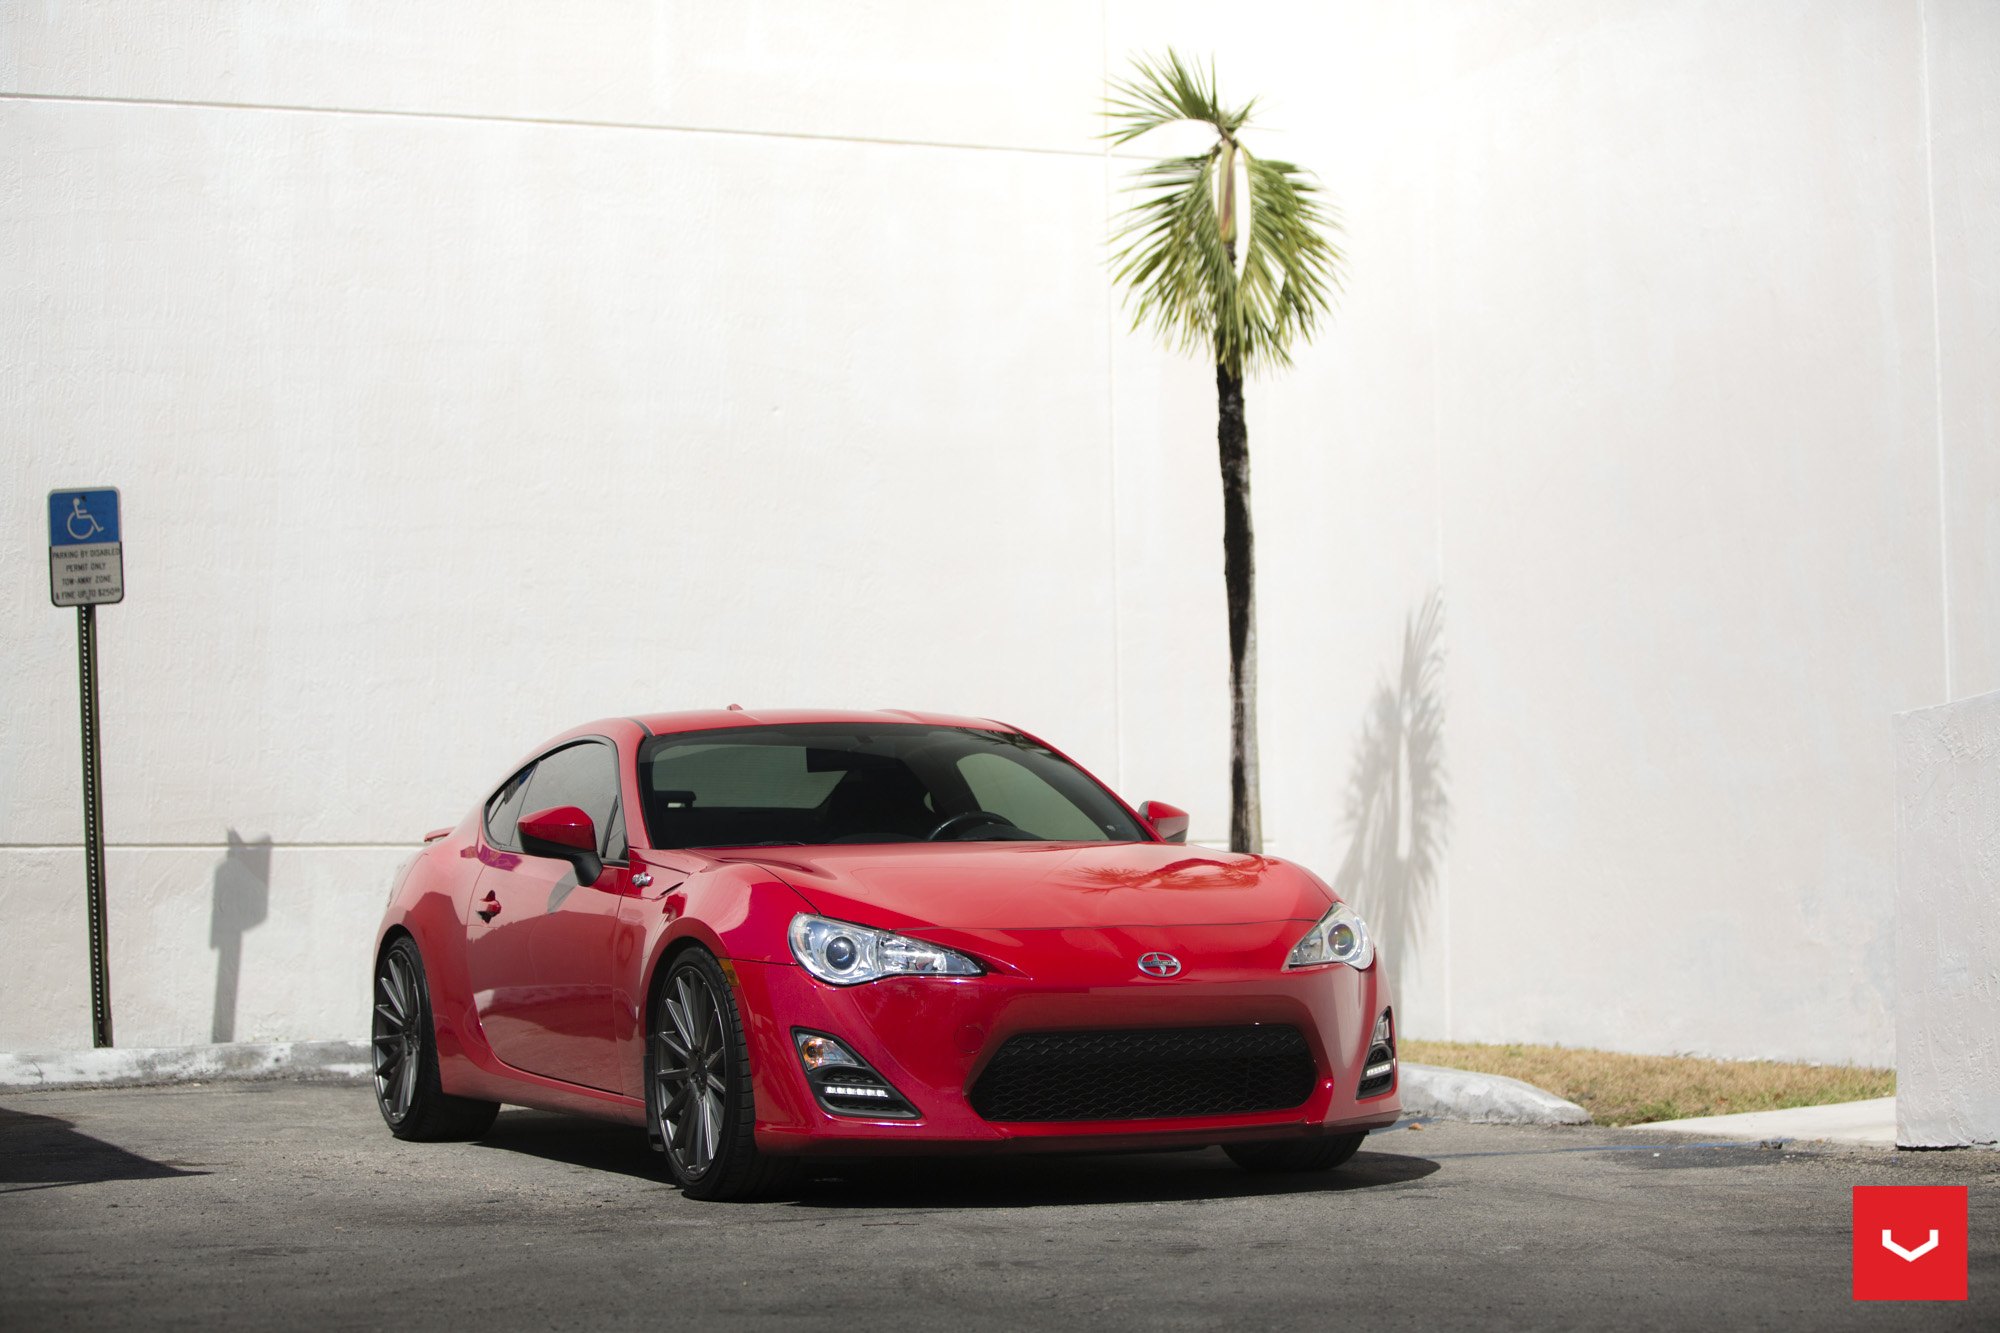 Front Bumper with LED Lights on Red Scion FRS - Photo by Vossen